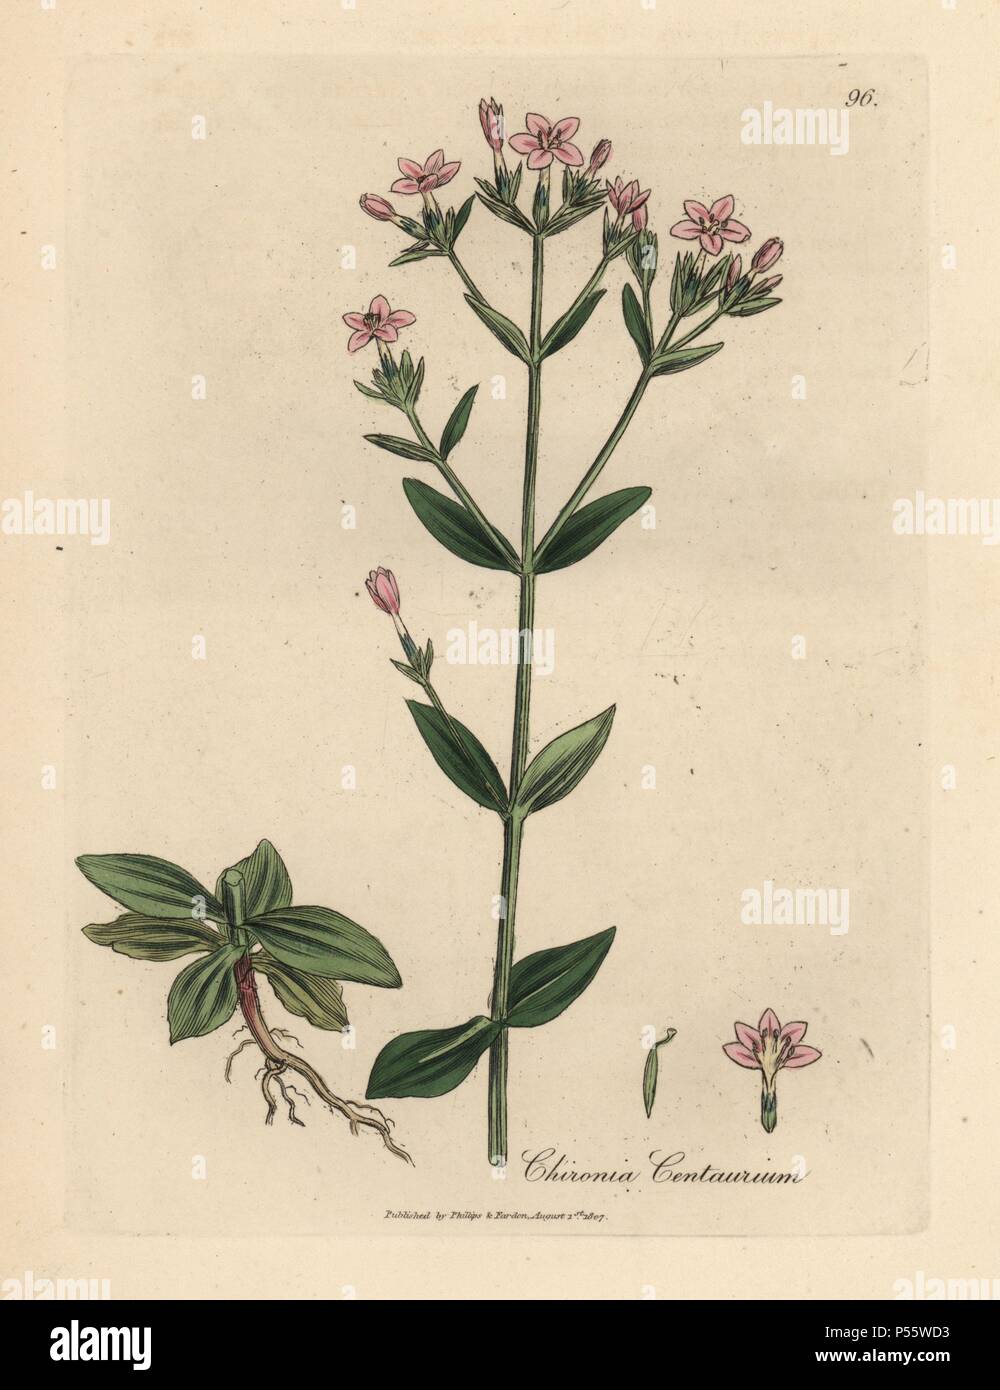 Centaury, Chironia centaurium. Handcoloured copperplate engraving from a botanical illustration by James Sowerby from William Woodville and Sir William Jackson Hooker's 'Medical Botany,' John Bohn, London, 1832. The tireless Sowerby (1757-1822) drew over 2, 500 plants for Smith's mammoth 'English Botany' (1790-1814) and 440 mushrooms for 'Coloured Figures of English Fungi ' (1797) among many other works. Stock Photo